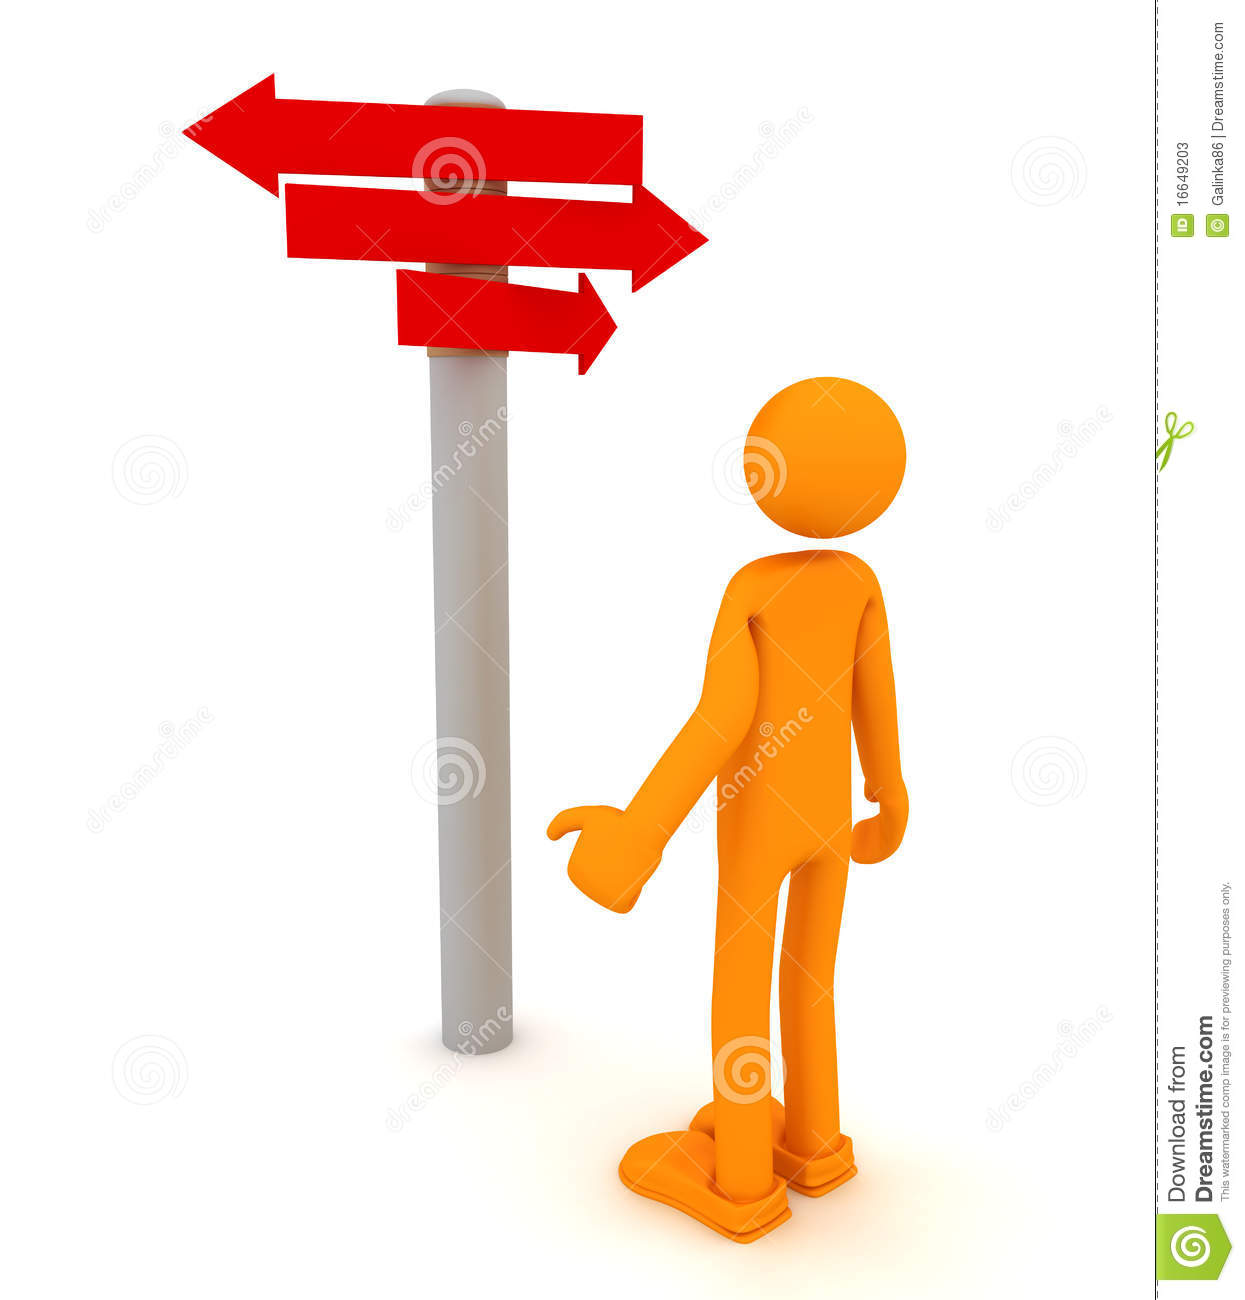 http://www.dreamstime.com/stock-photos-choice-directions-signs-image16649203